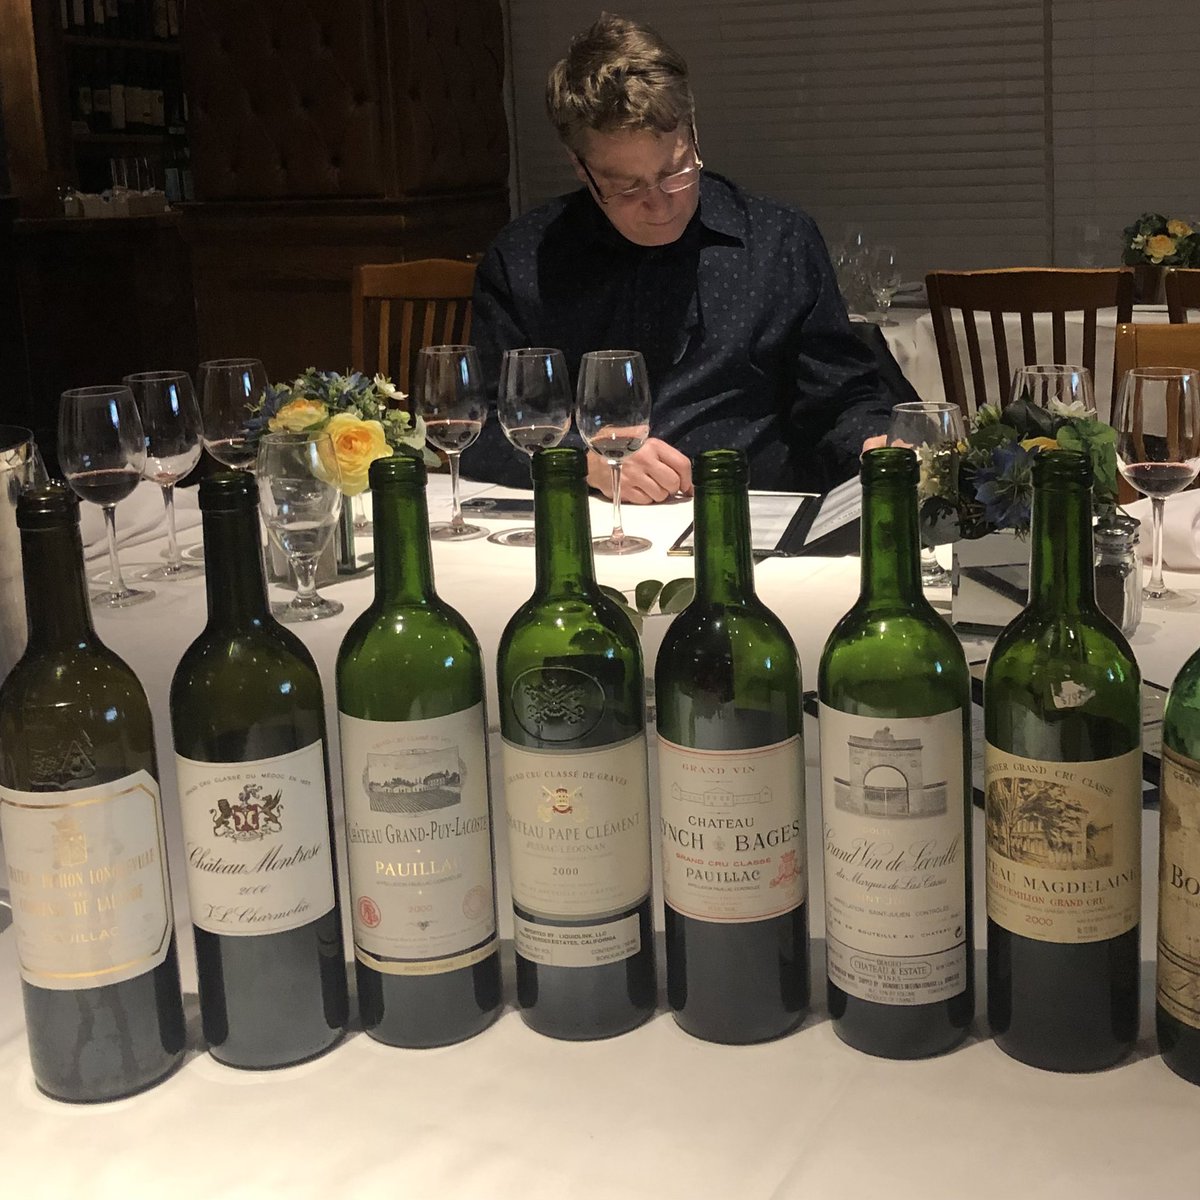 Fun night out with the guys, tasting some 2000 Bordeaux blind. #wine #bordeaux #blindtasting